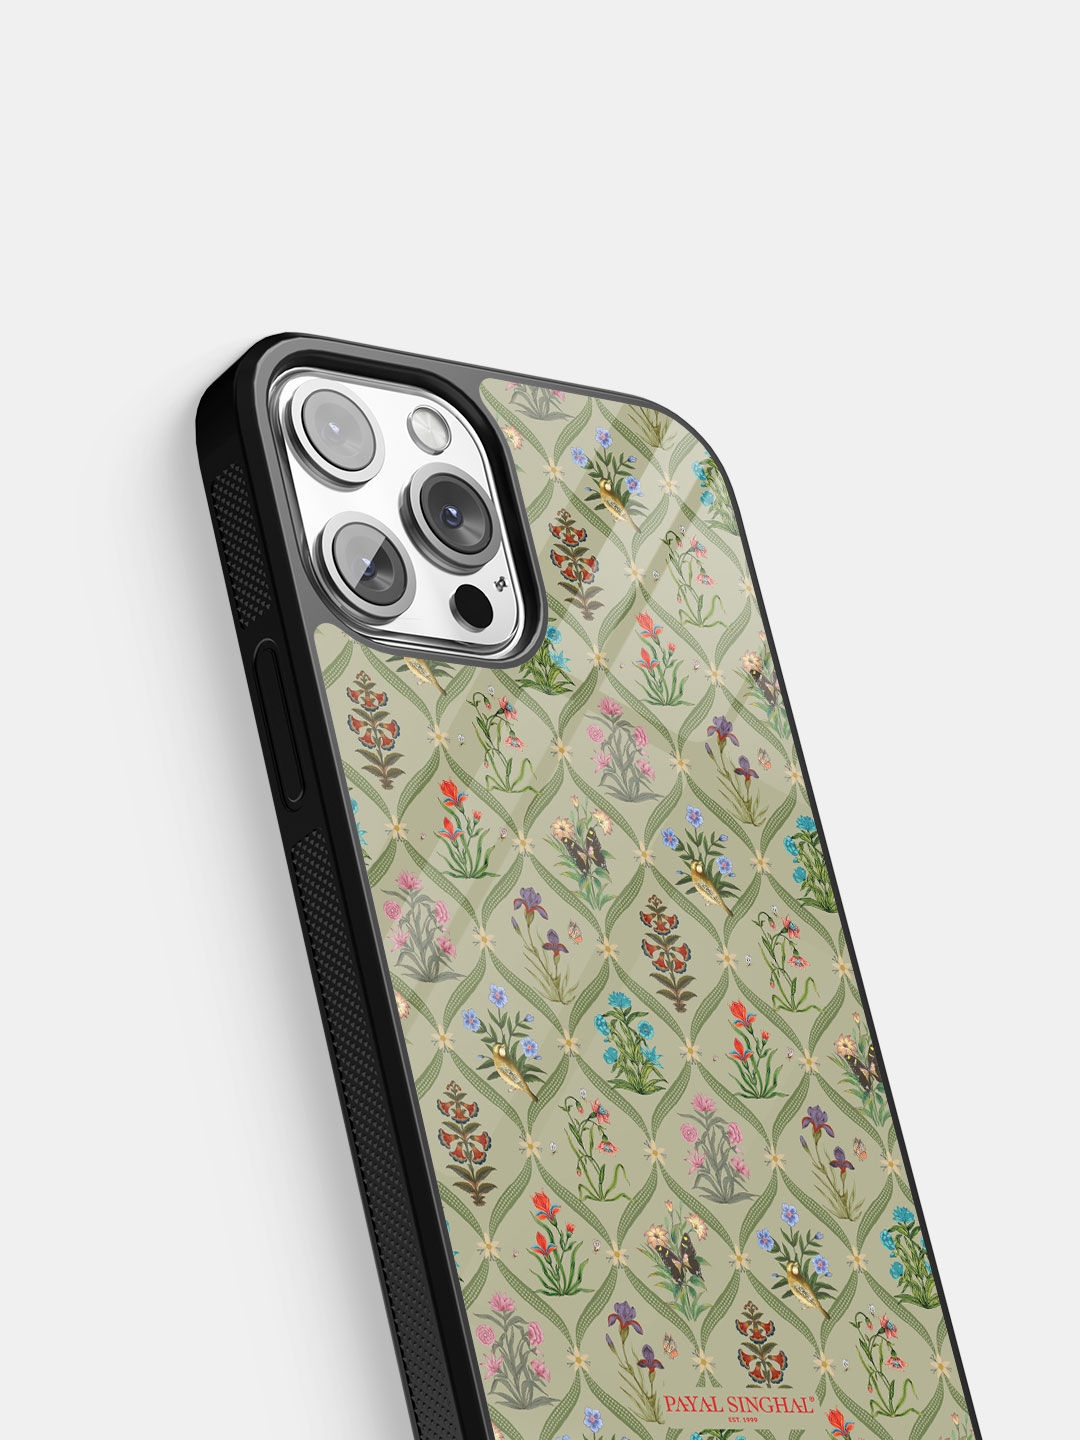 Payal Singhal Mughal Motifs - Glass Case For iPhone 13 Pro Max